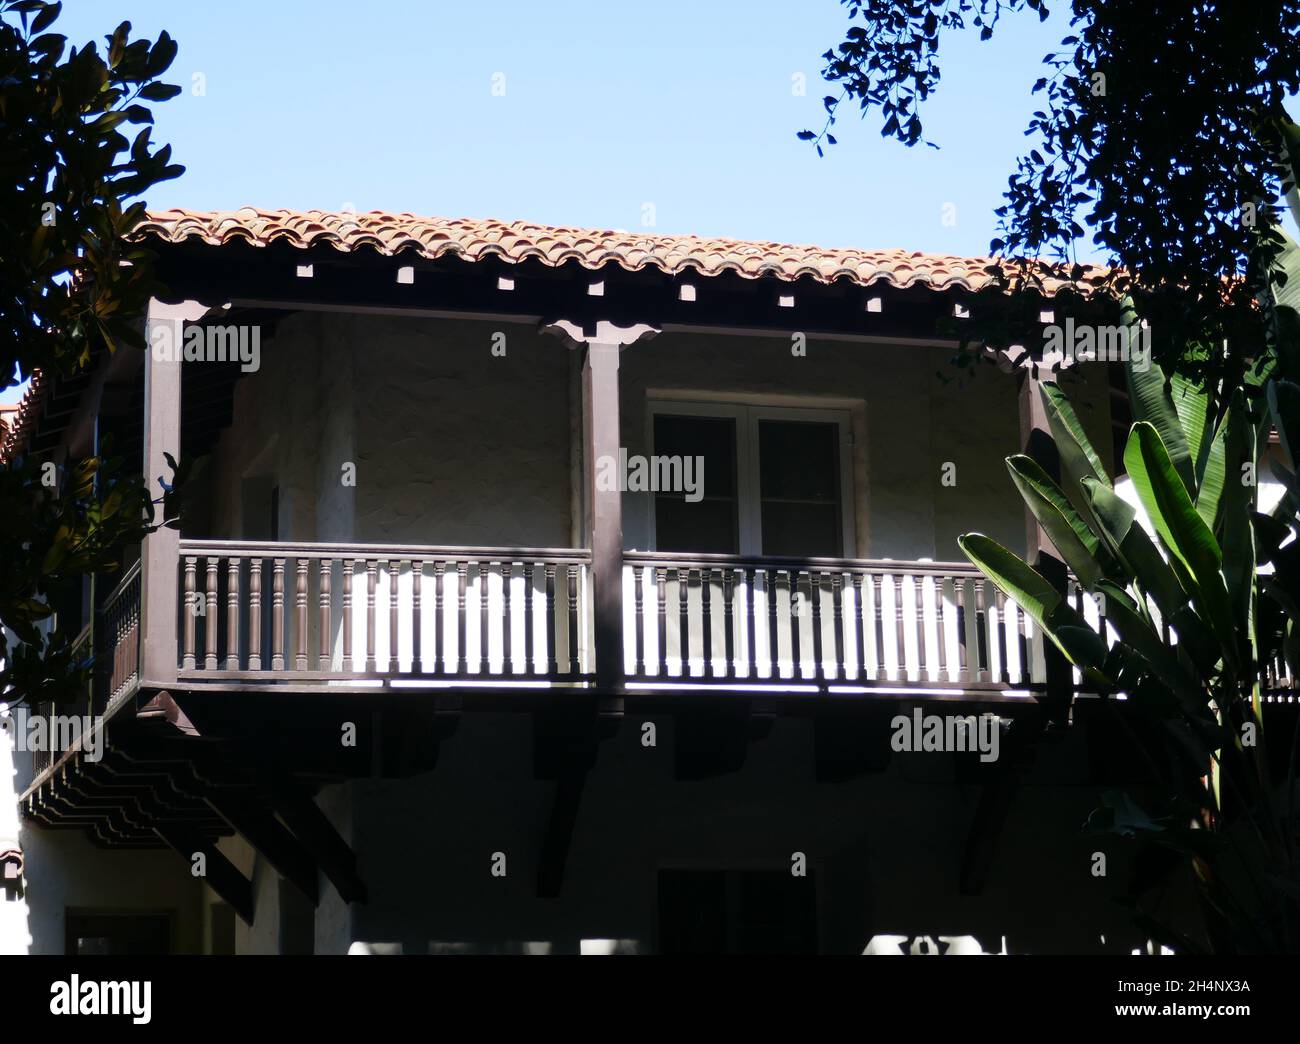 Beverly Hills, California, USA 10th September 2021 A general view of atmosphere of Actor Fredric March and Actress Florence Eldridge's Former home/house at 724 N. Rodeo Drive on September 10, 2021 in Beverly Hills, California, USA. Photo by Barry King/Alamy Stock Photo Stock Photo